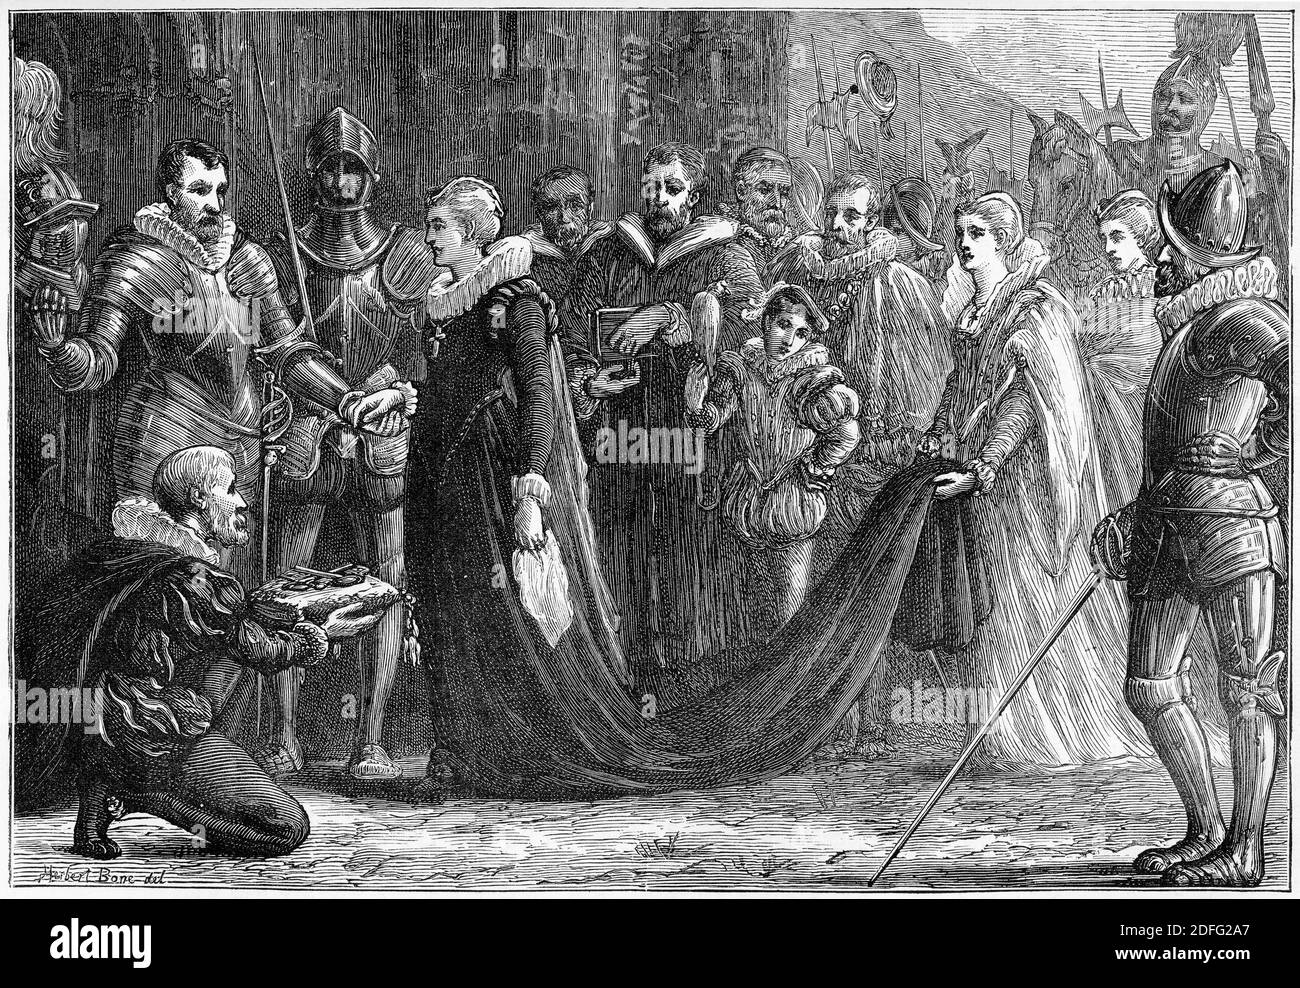 Engraving of Mary Queen of Scots entering Hollyrood Palace.   Illustration from 'The history of Protestantism' by James Aitken Wylie (1808-1890), pub. 1878 Stock Photo